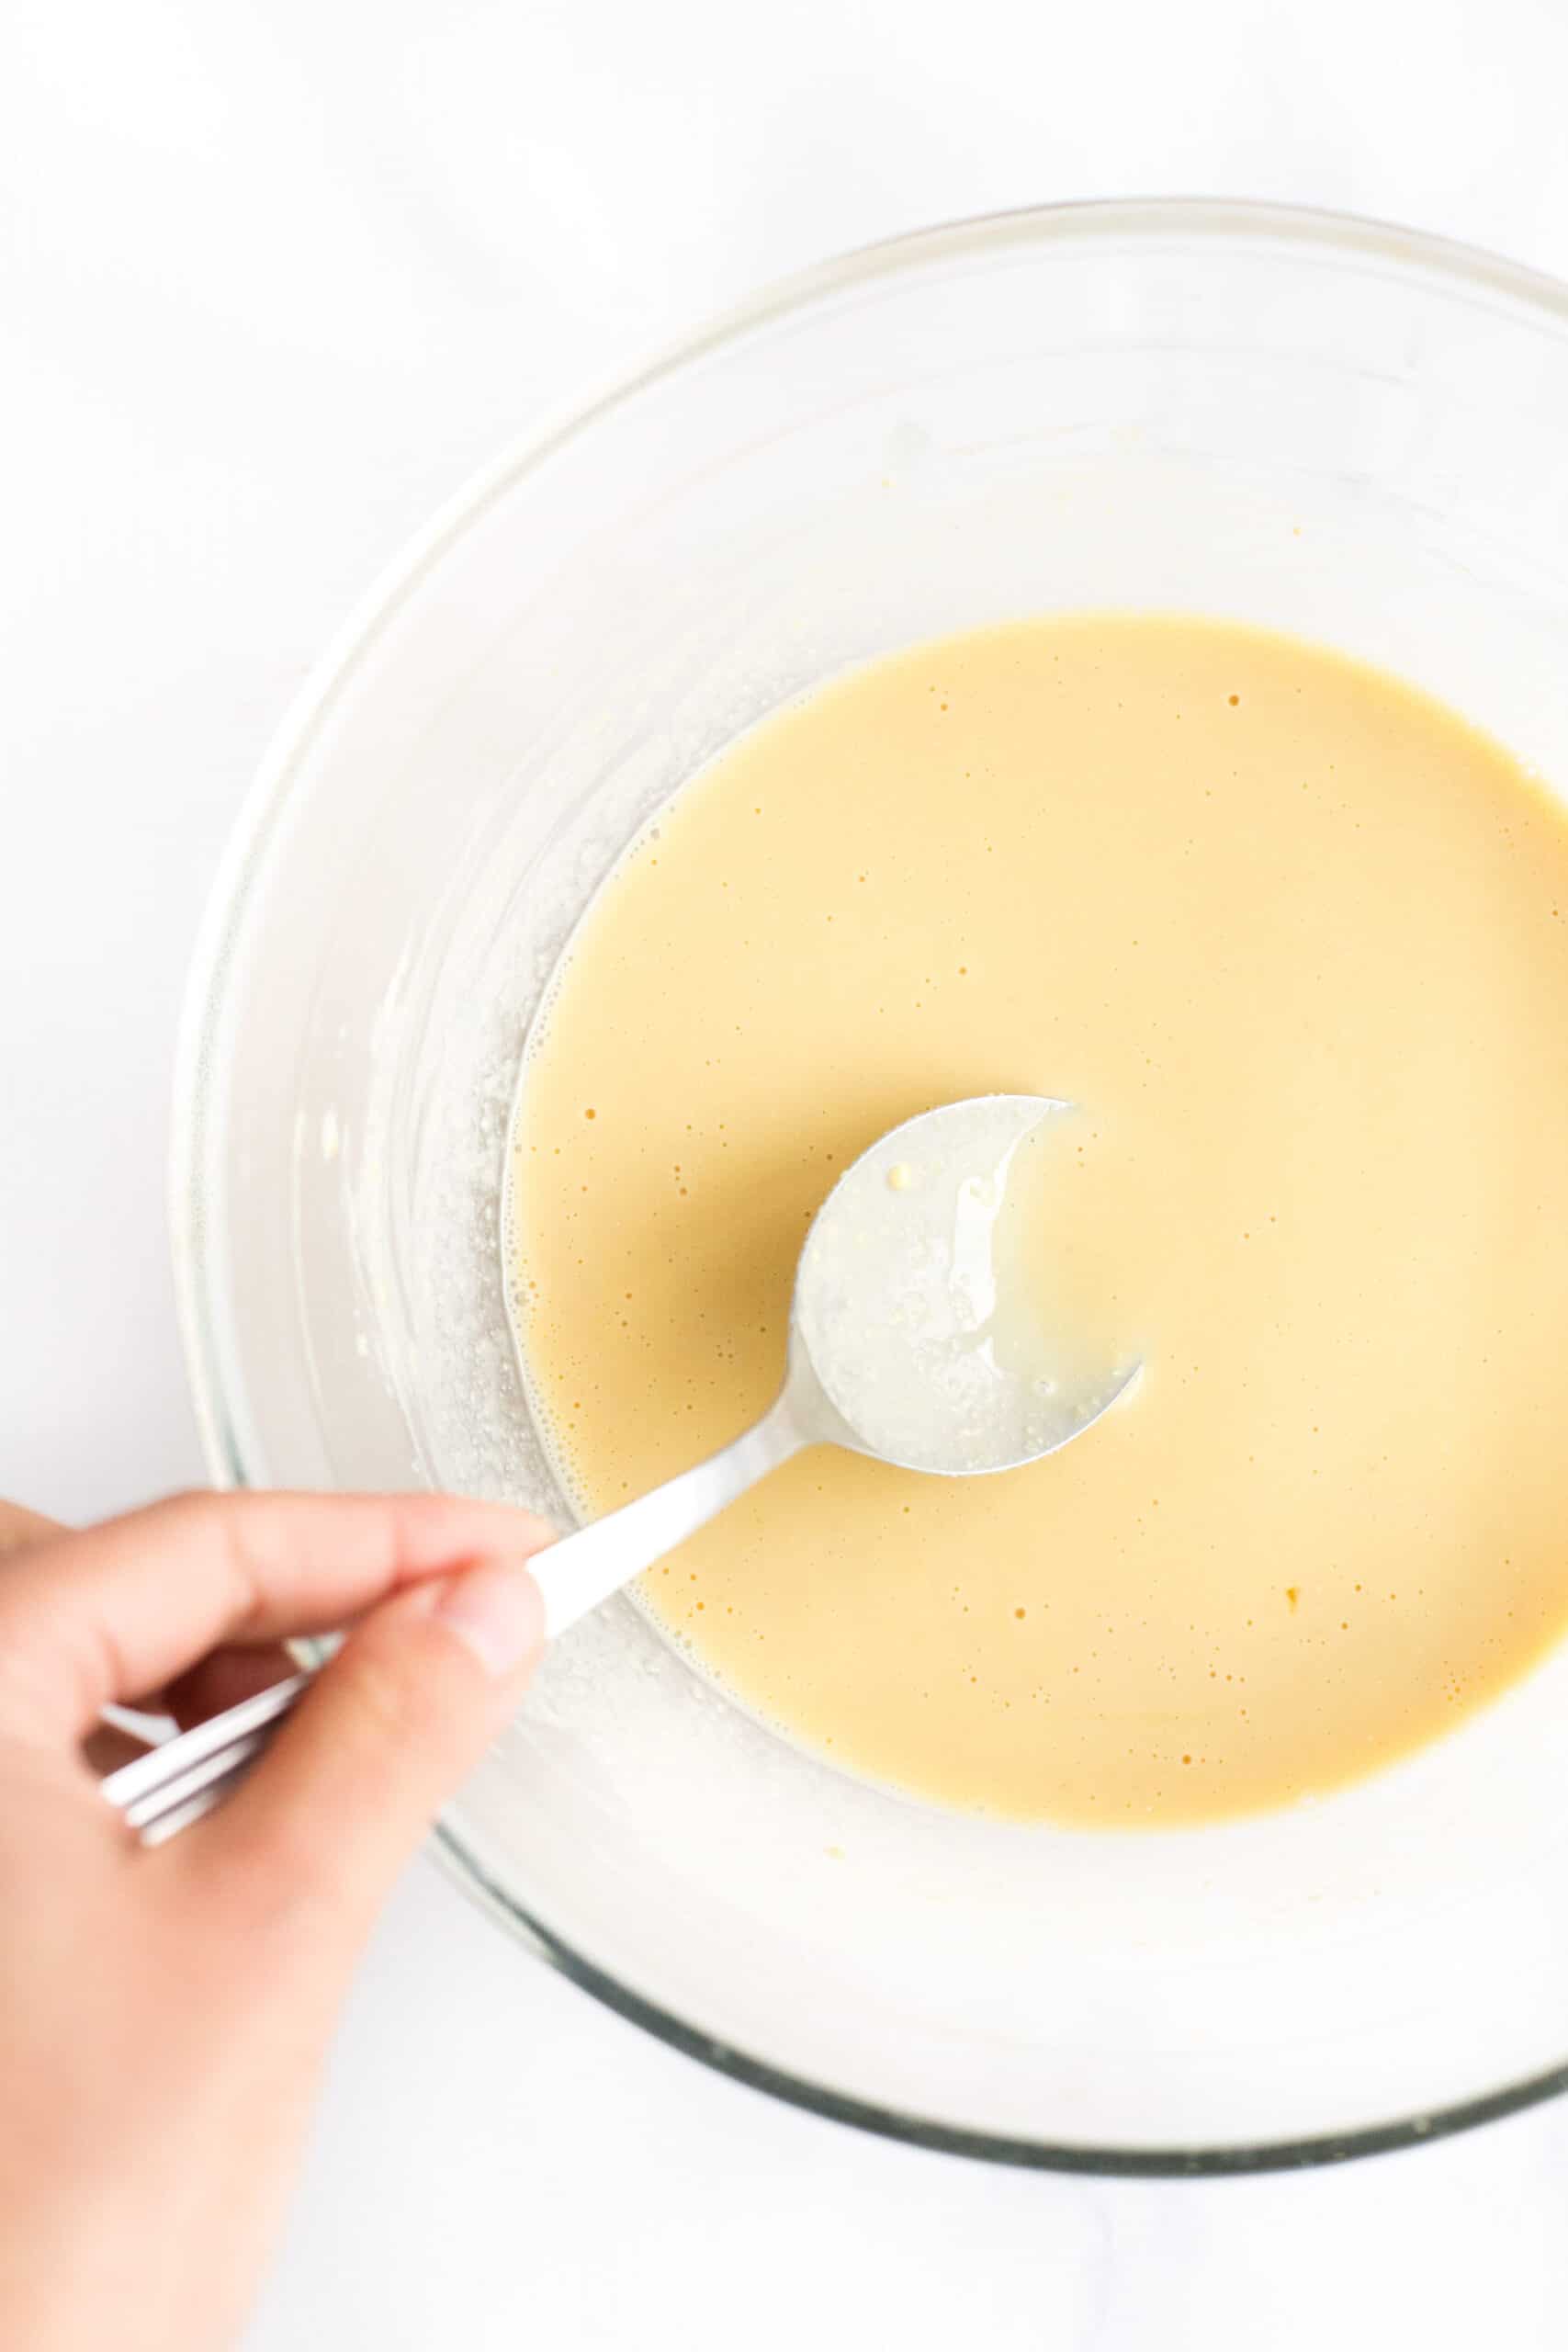 Dipping a spoon into a bowl of chickpea batter.